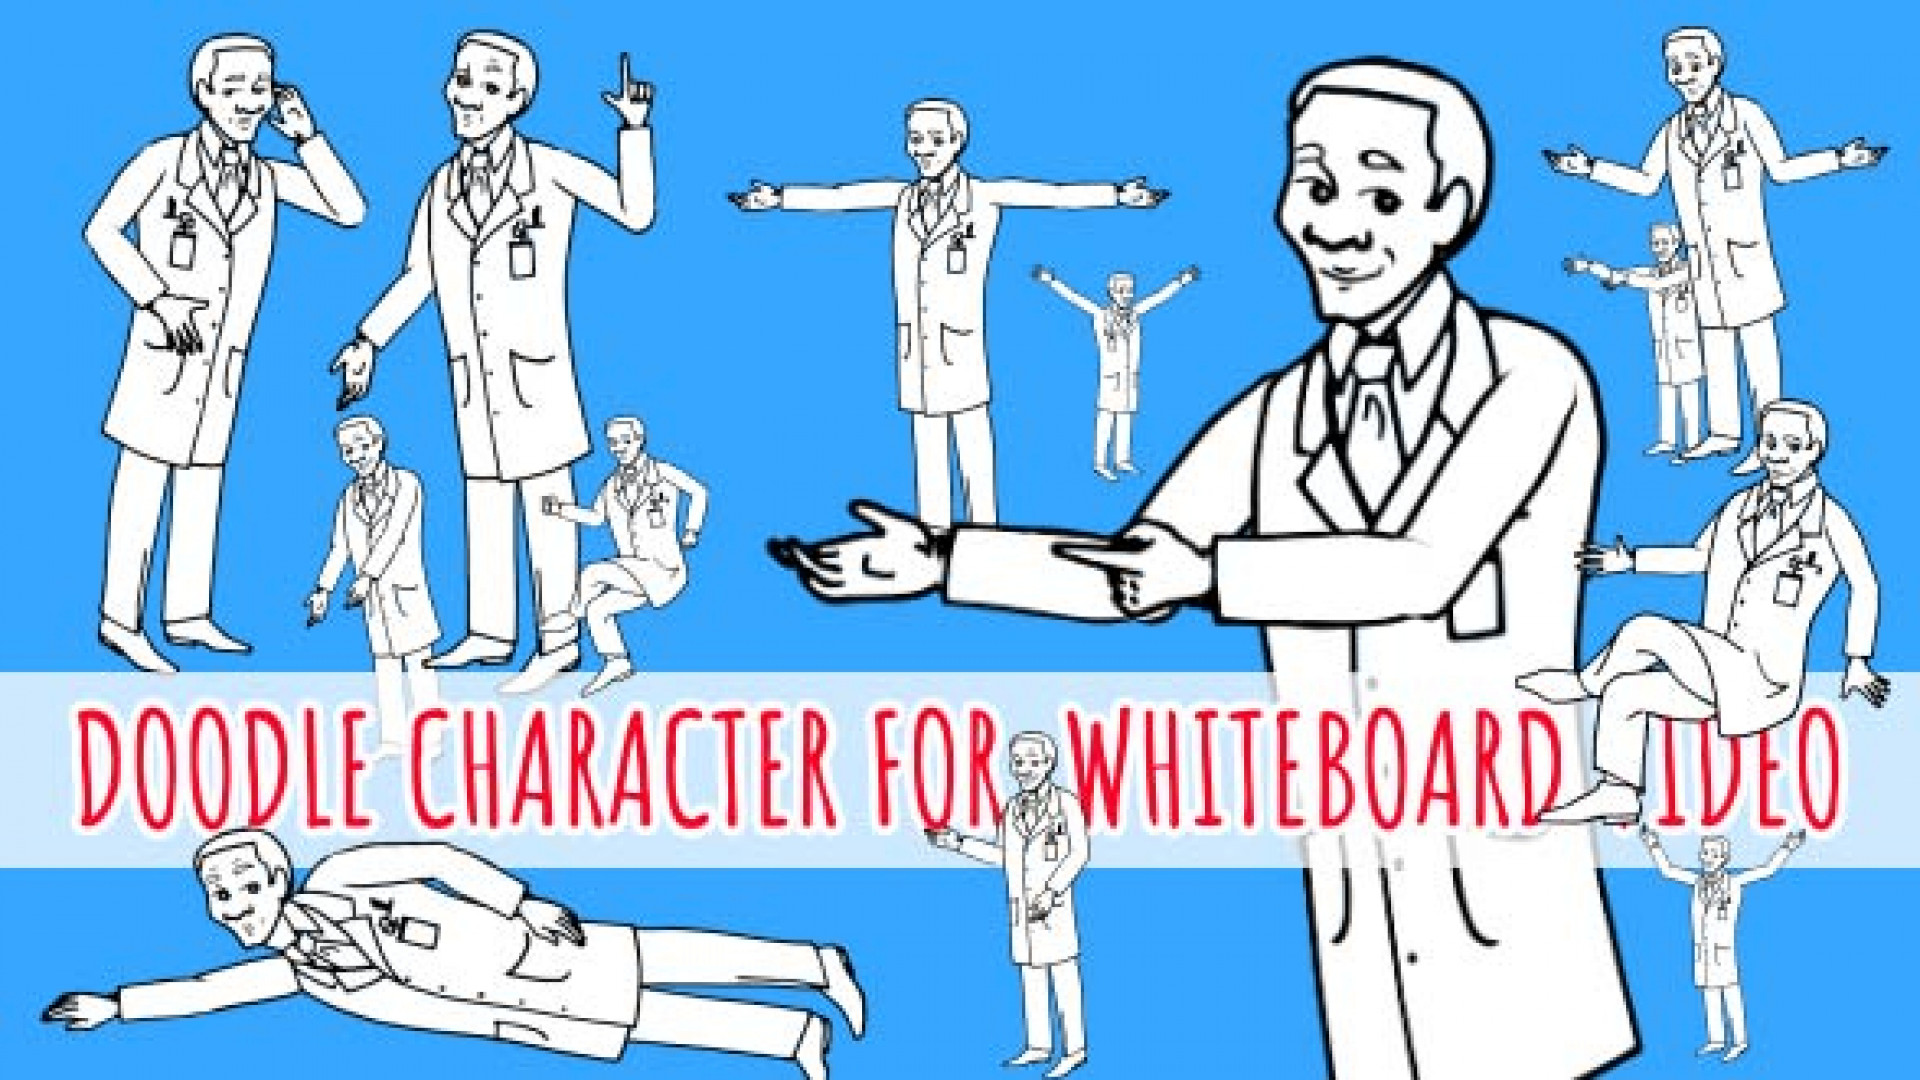 Doodle Animation - Doctor Character 3 - After Effects Templates